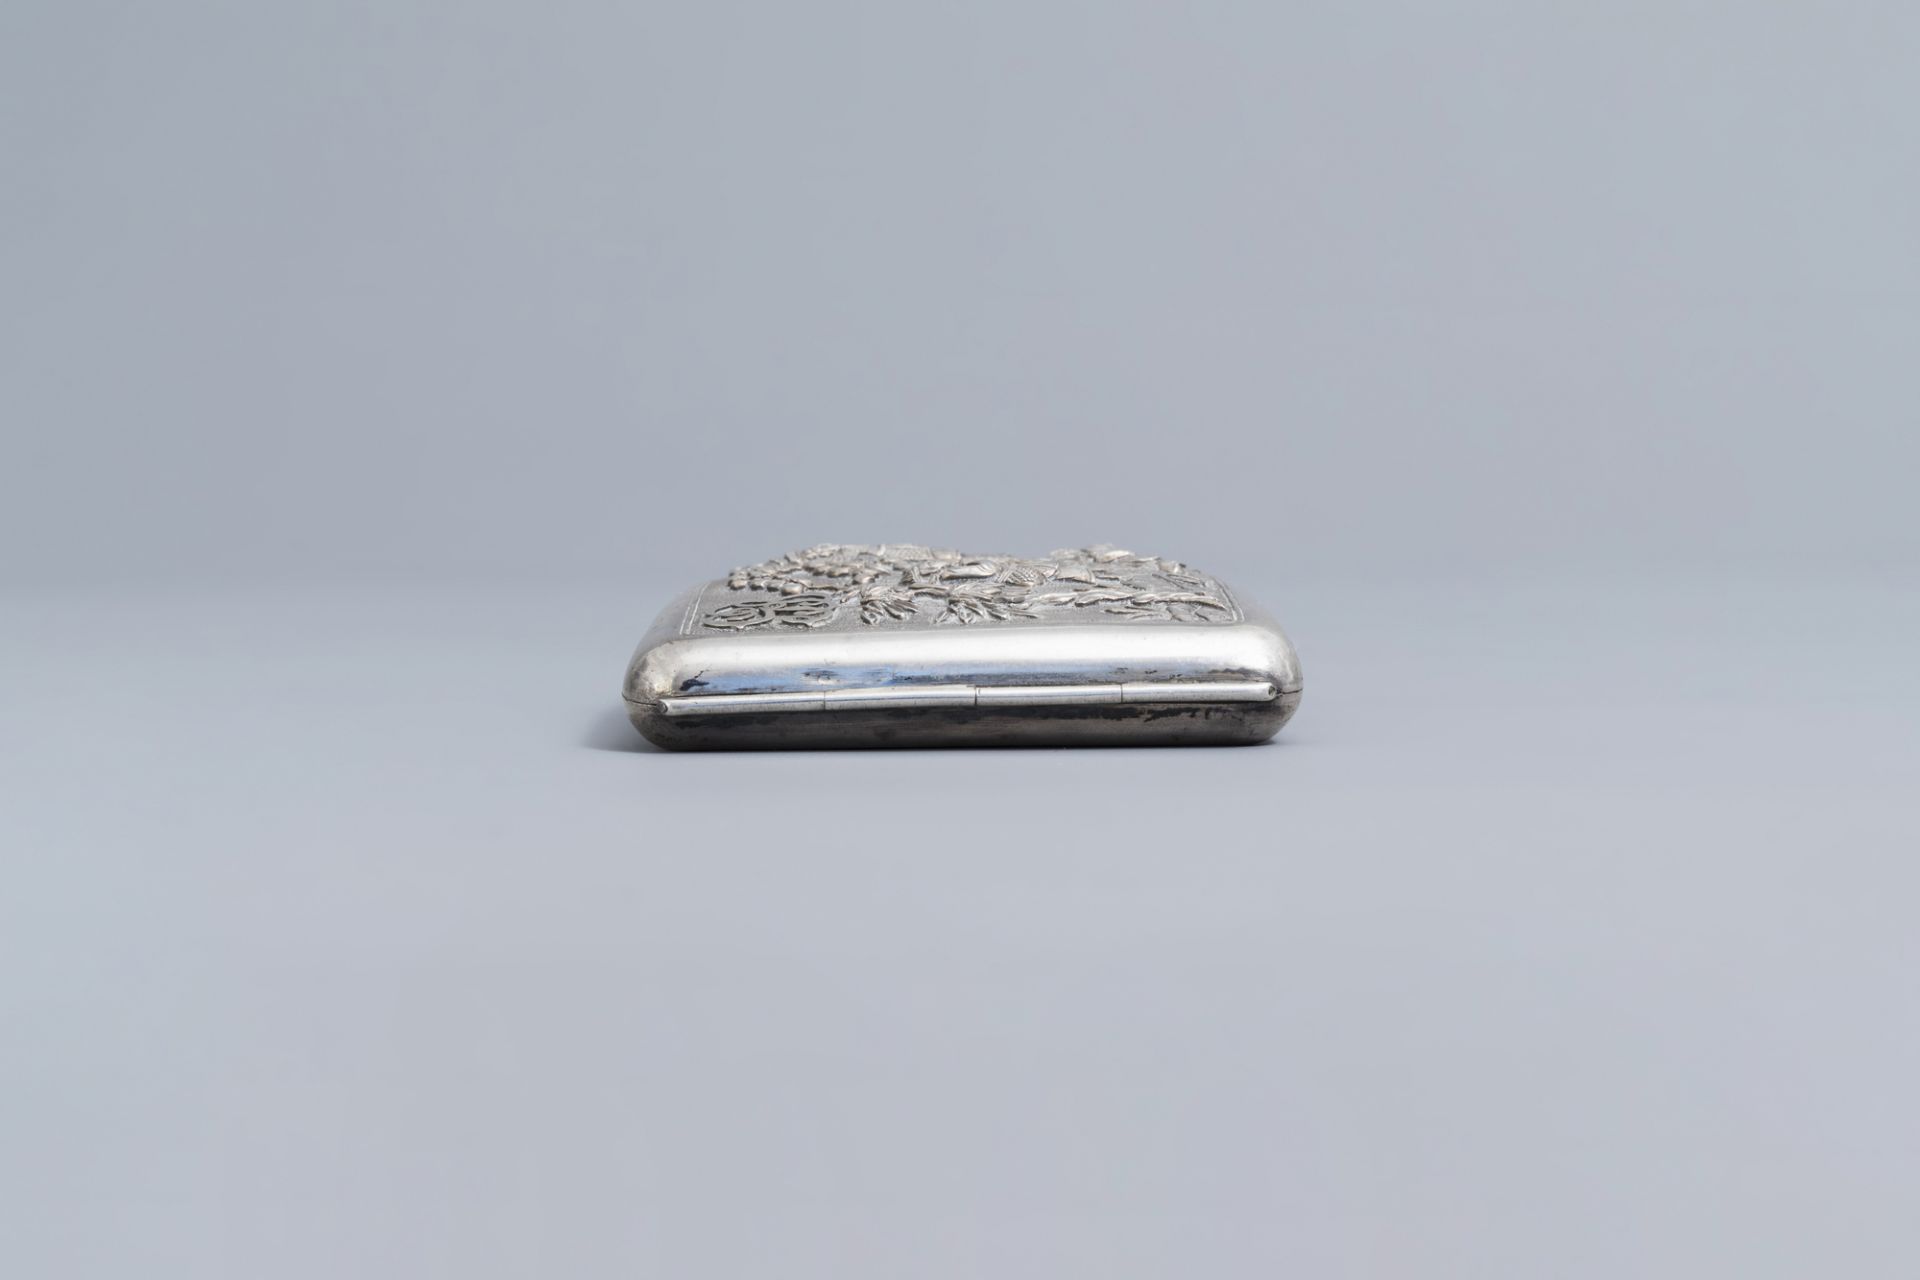 A Chinese silver cigarette box with figures in a landscape and monogram 'GB', 19th/20th C. - Image 7 of 8